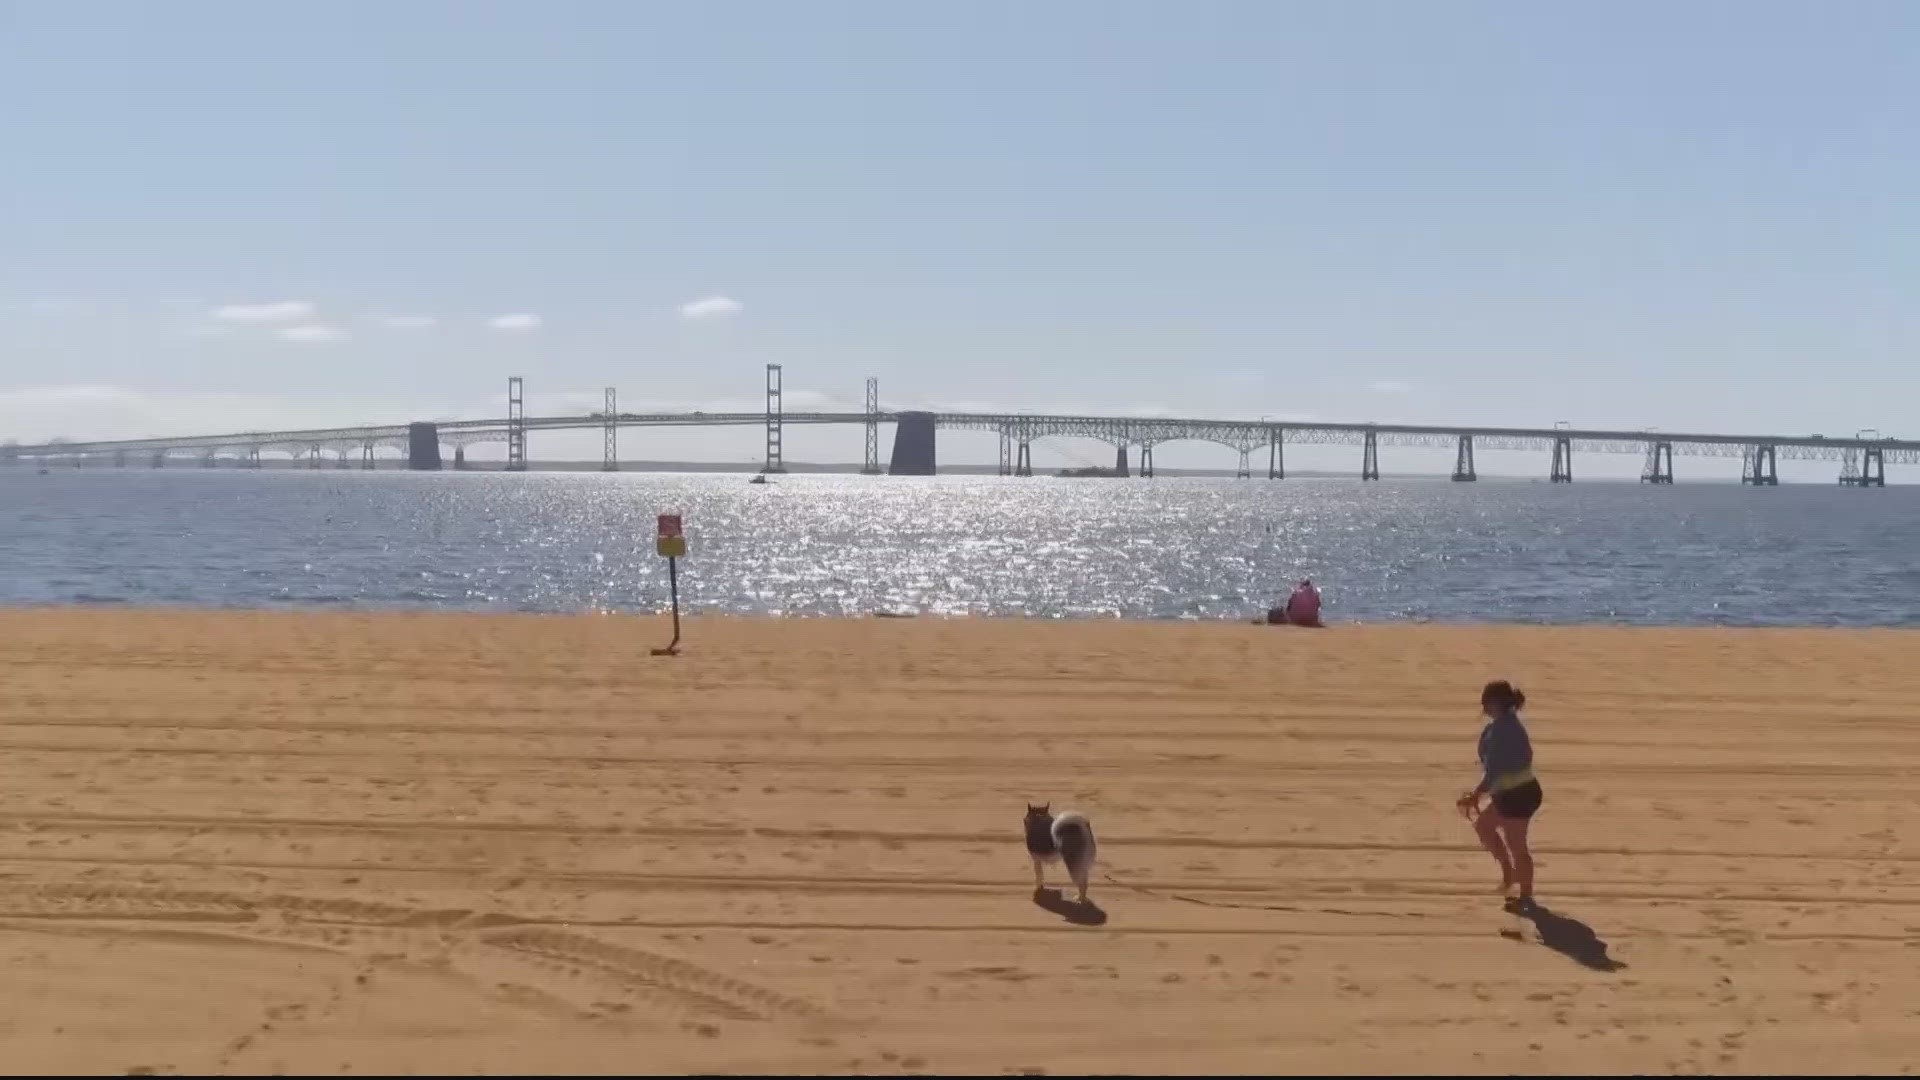 The Chesapeake Bay Bridge has some good news about the new efforts to the keep traffic flowing and safe.